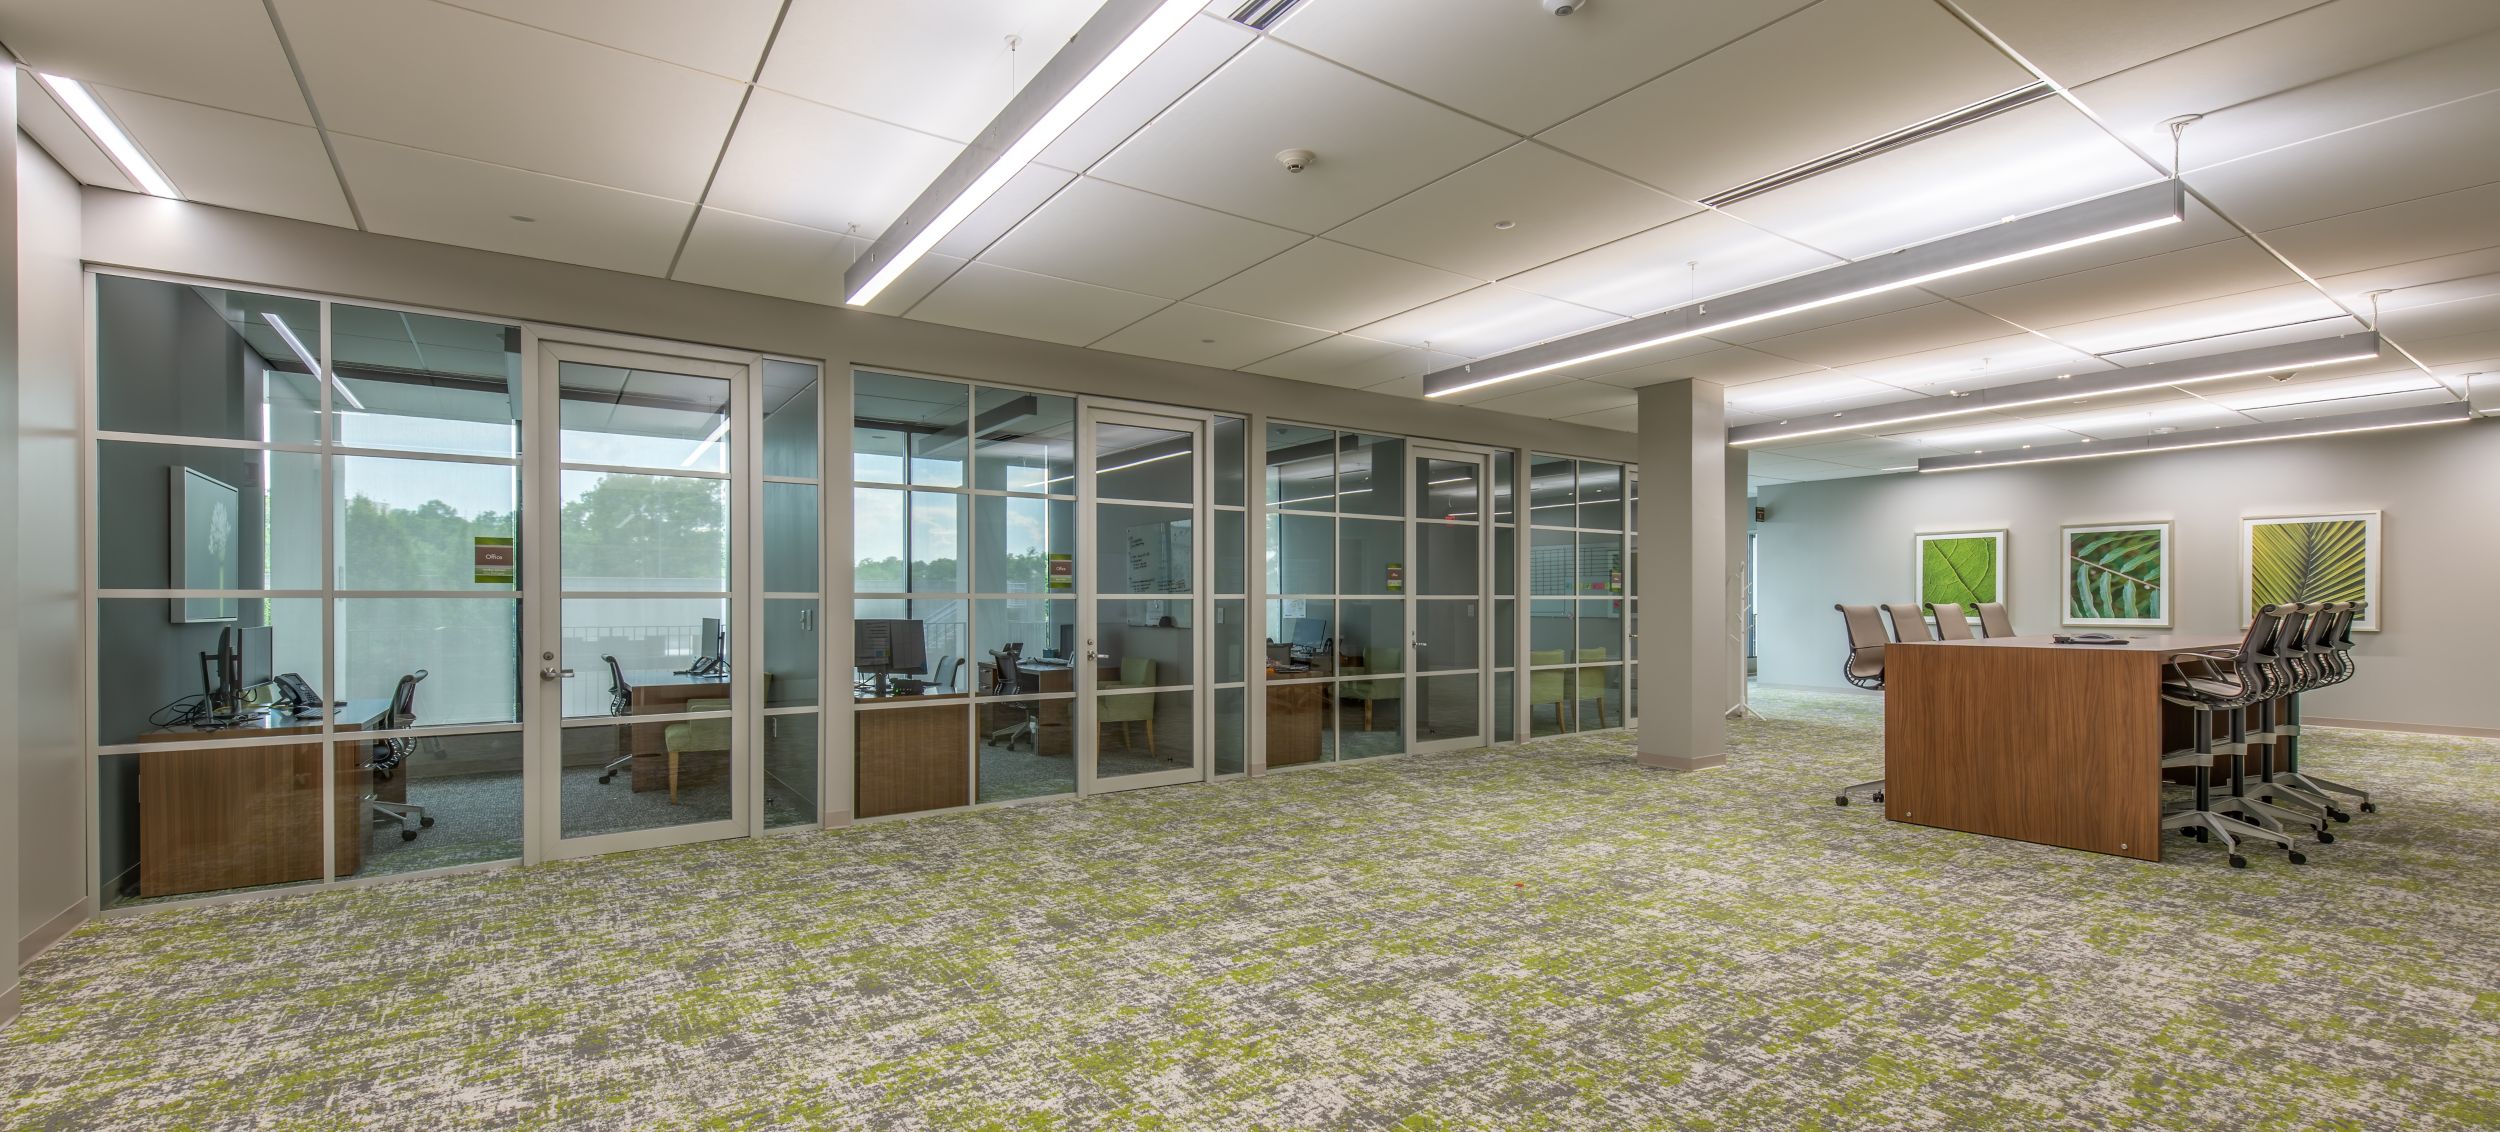 Interface Painted Gesture plank carpet tile in open meeting area with private offices in background image number 4